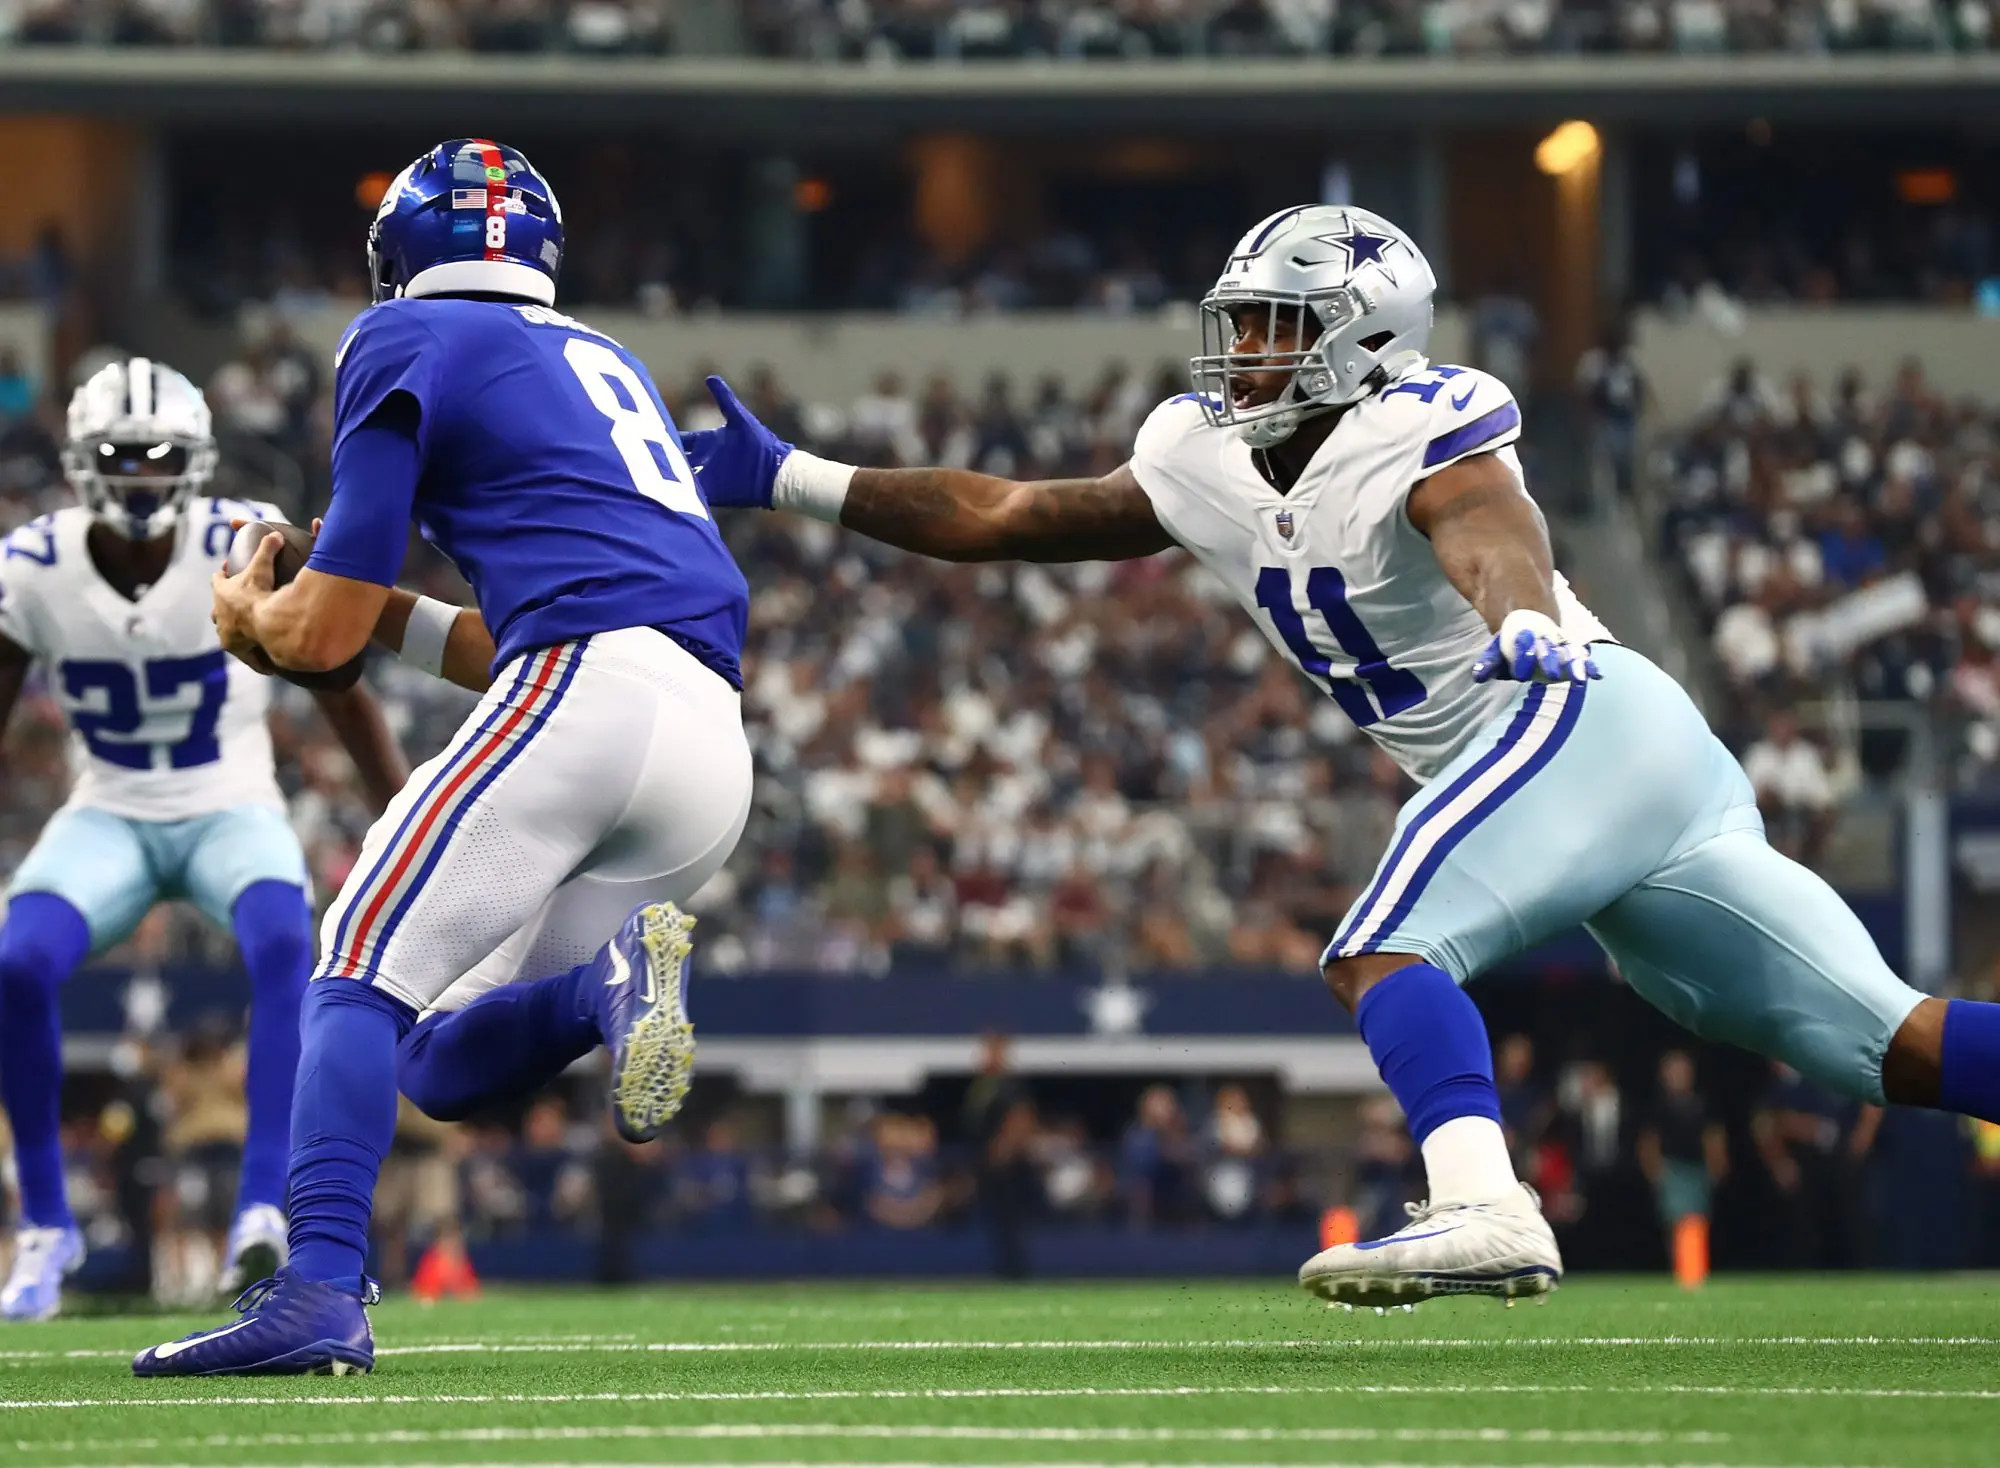 Cowboys Worried About LB Micah Parsons Illness? Giants’ Saquon Barkley: ‘Best Player in the NFL’